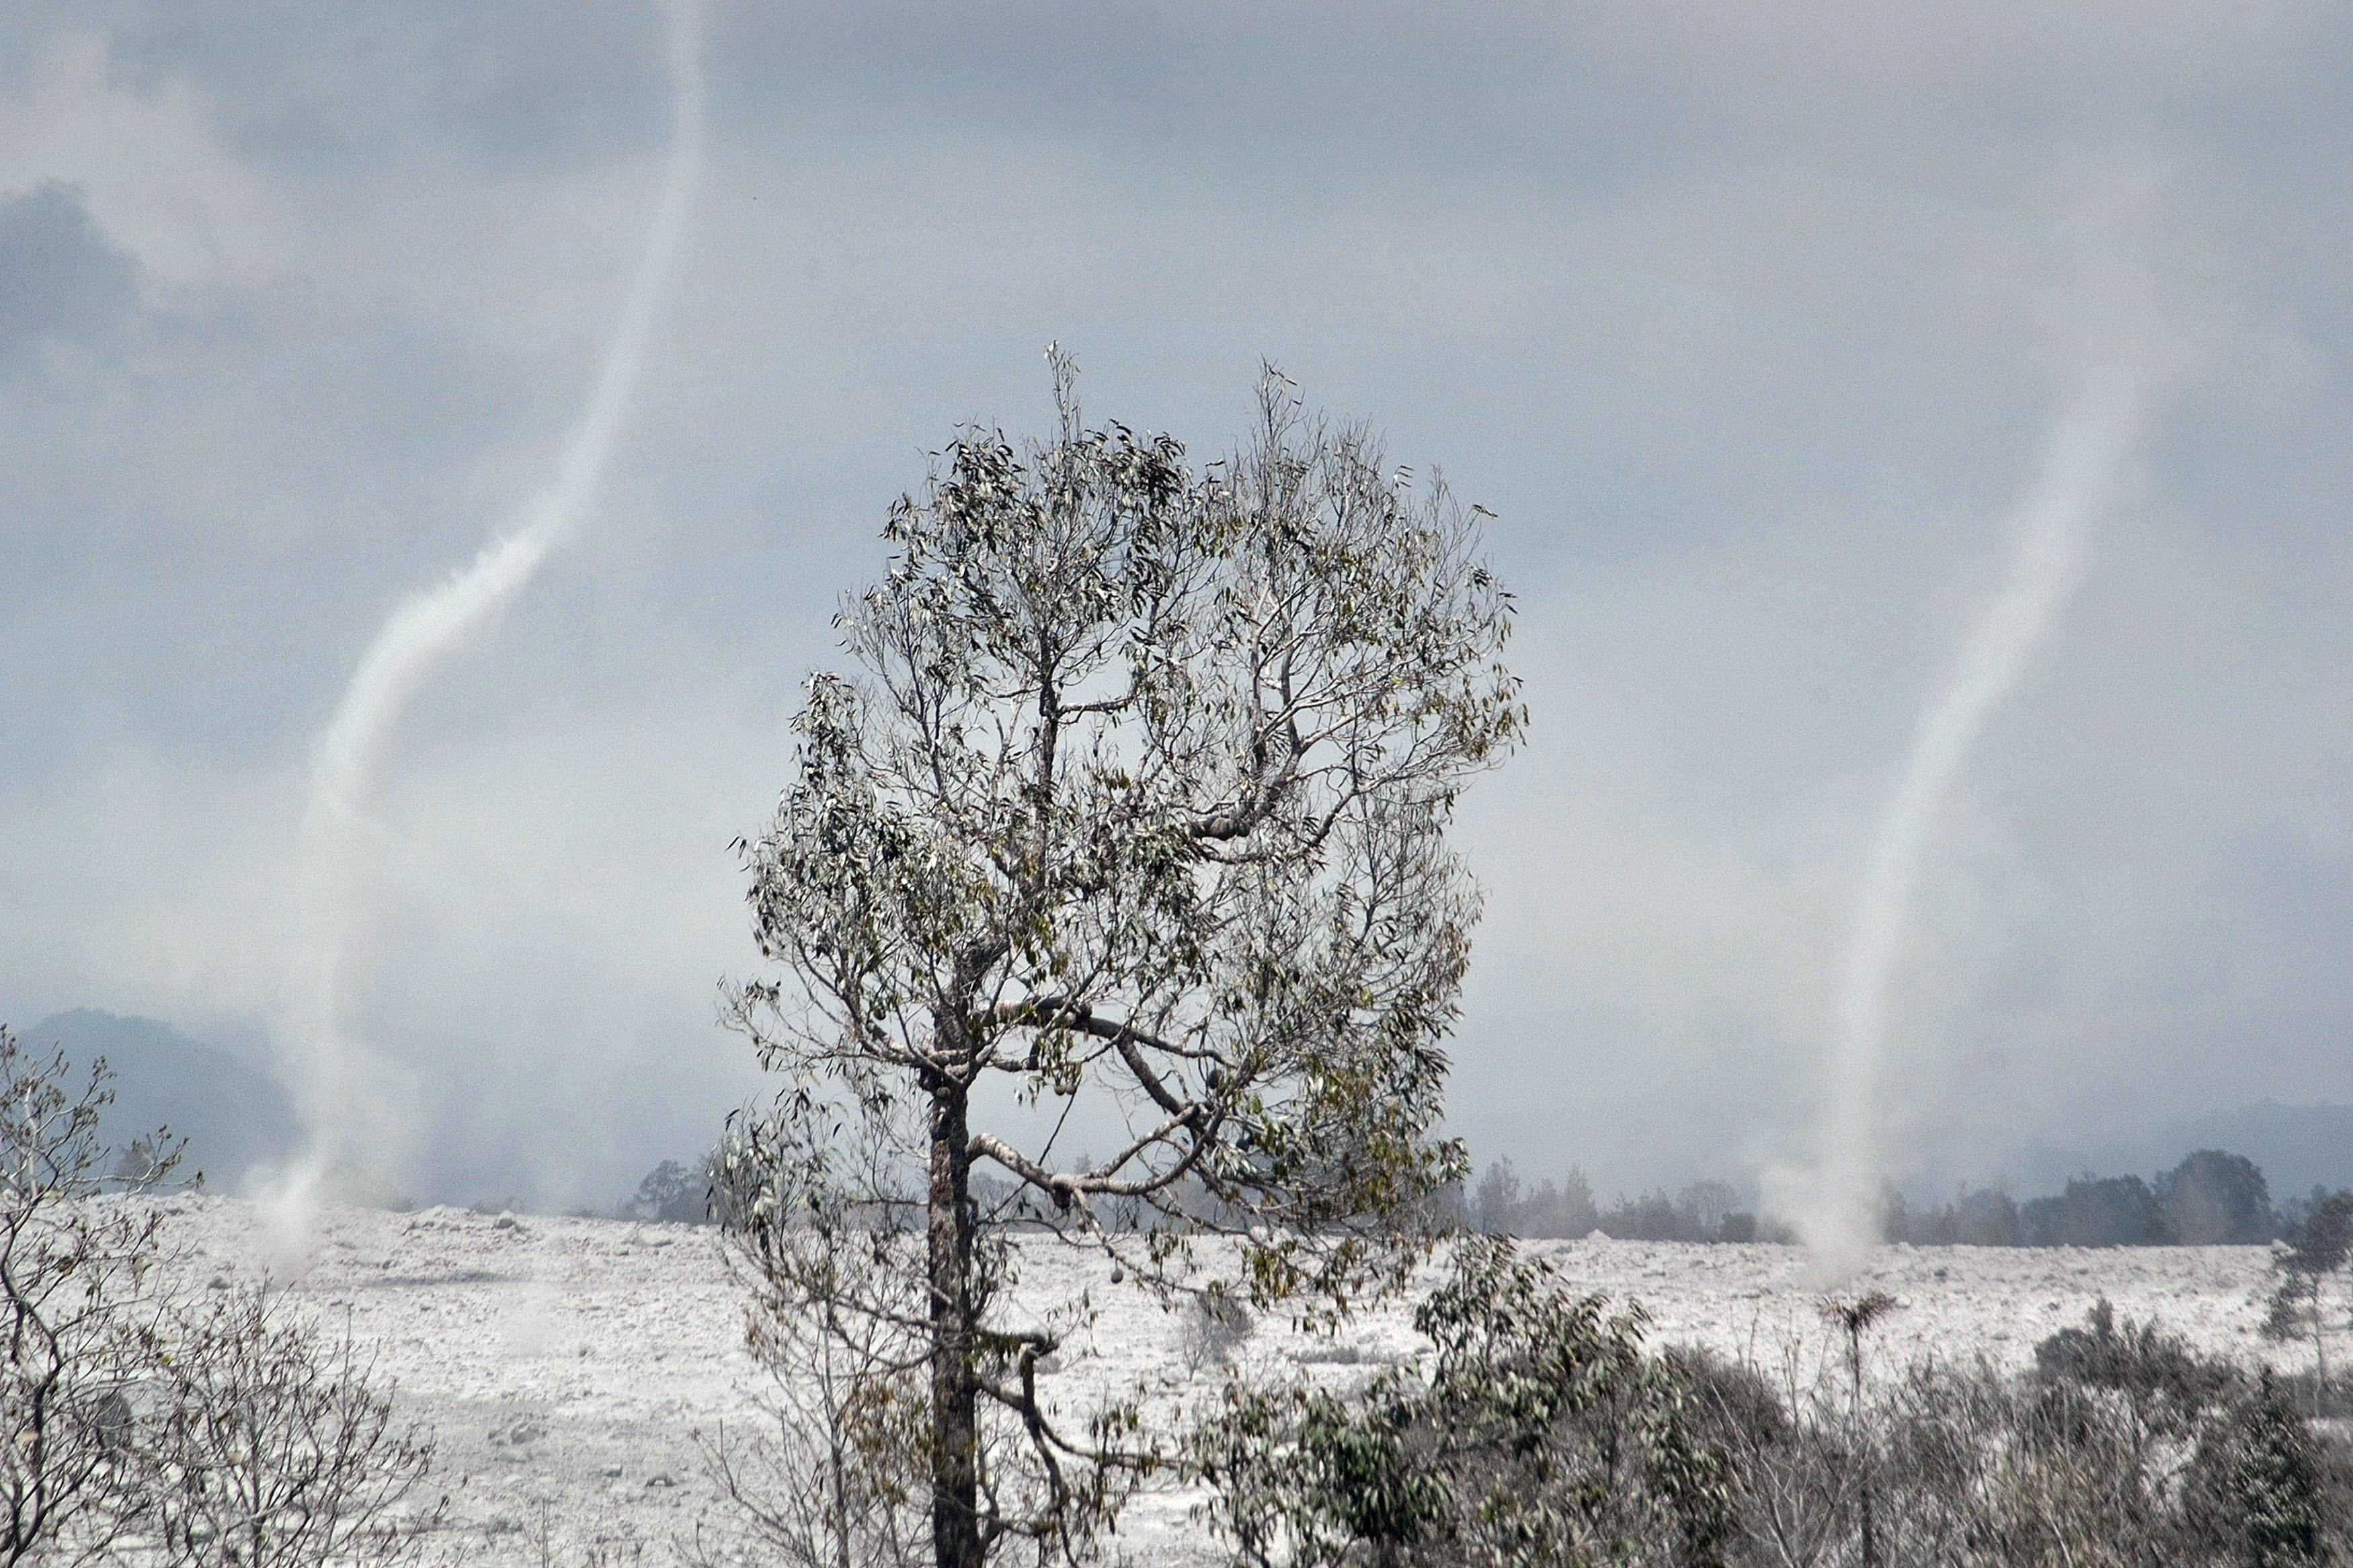 Wind spouts (L and R) appear over the volcanic ash covered landscape in Berastepu village, in the district of Karo near the Mount Sinabung volcano in Indonesia Jan. 26, 2014.